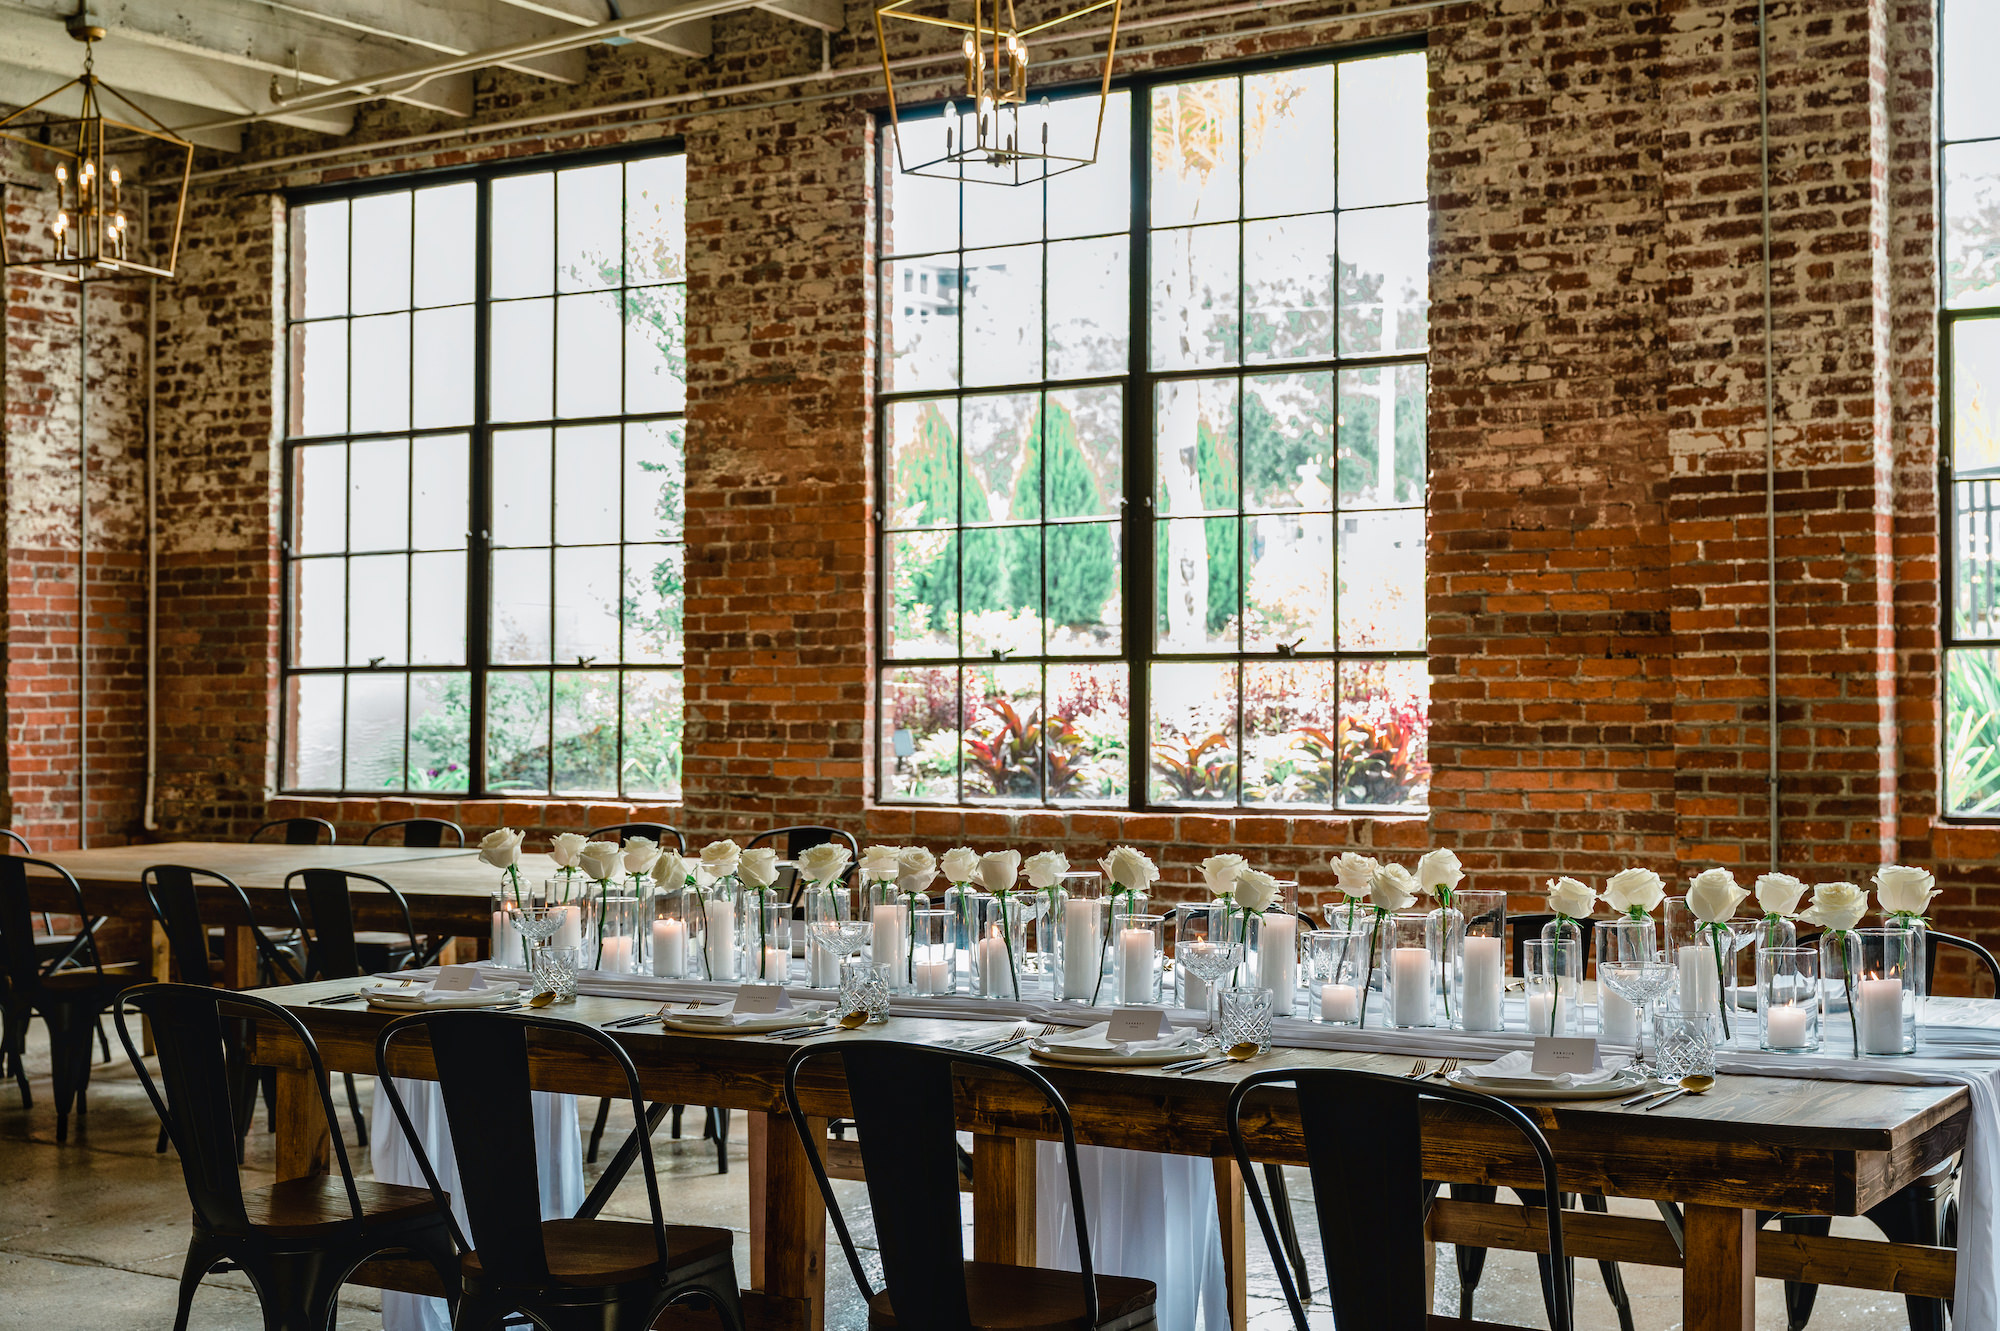 Wooden Wedding Reception Tables with Black Metal Chairs and White Rose Centerpieces | Dade City Florist Save the Date Florida | Venue at the Block